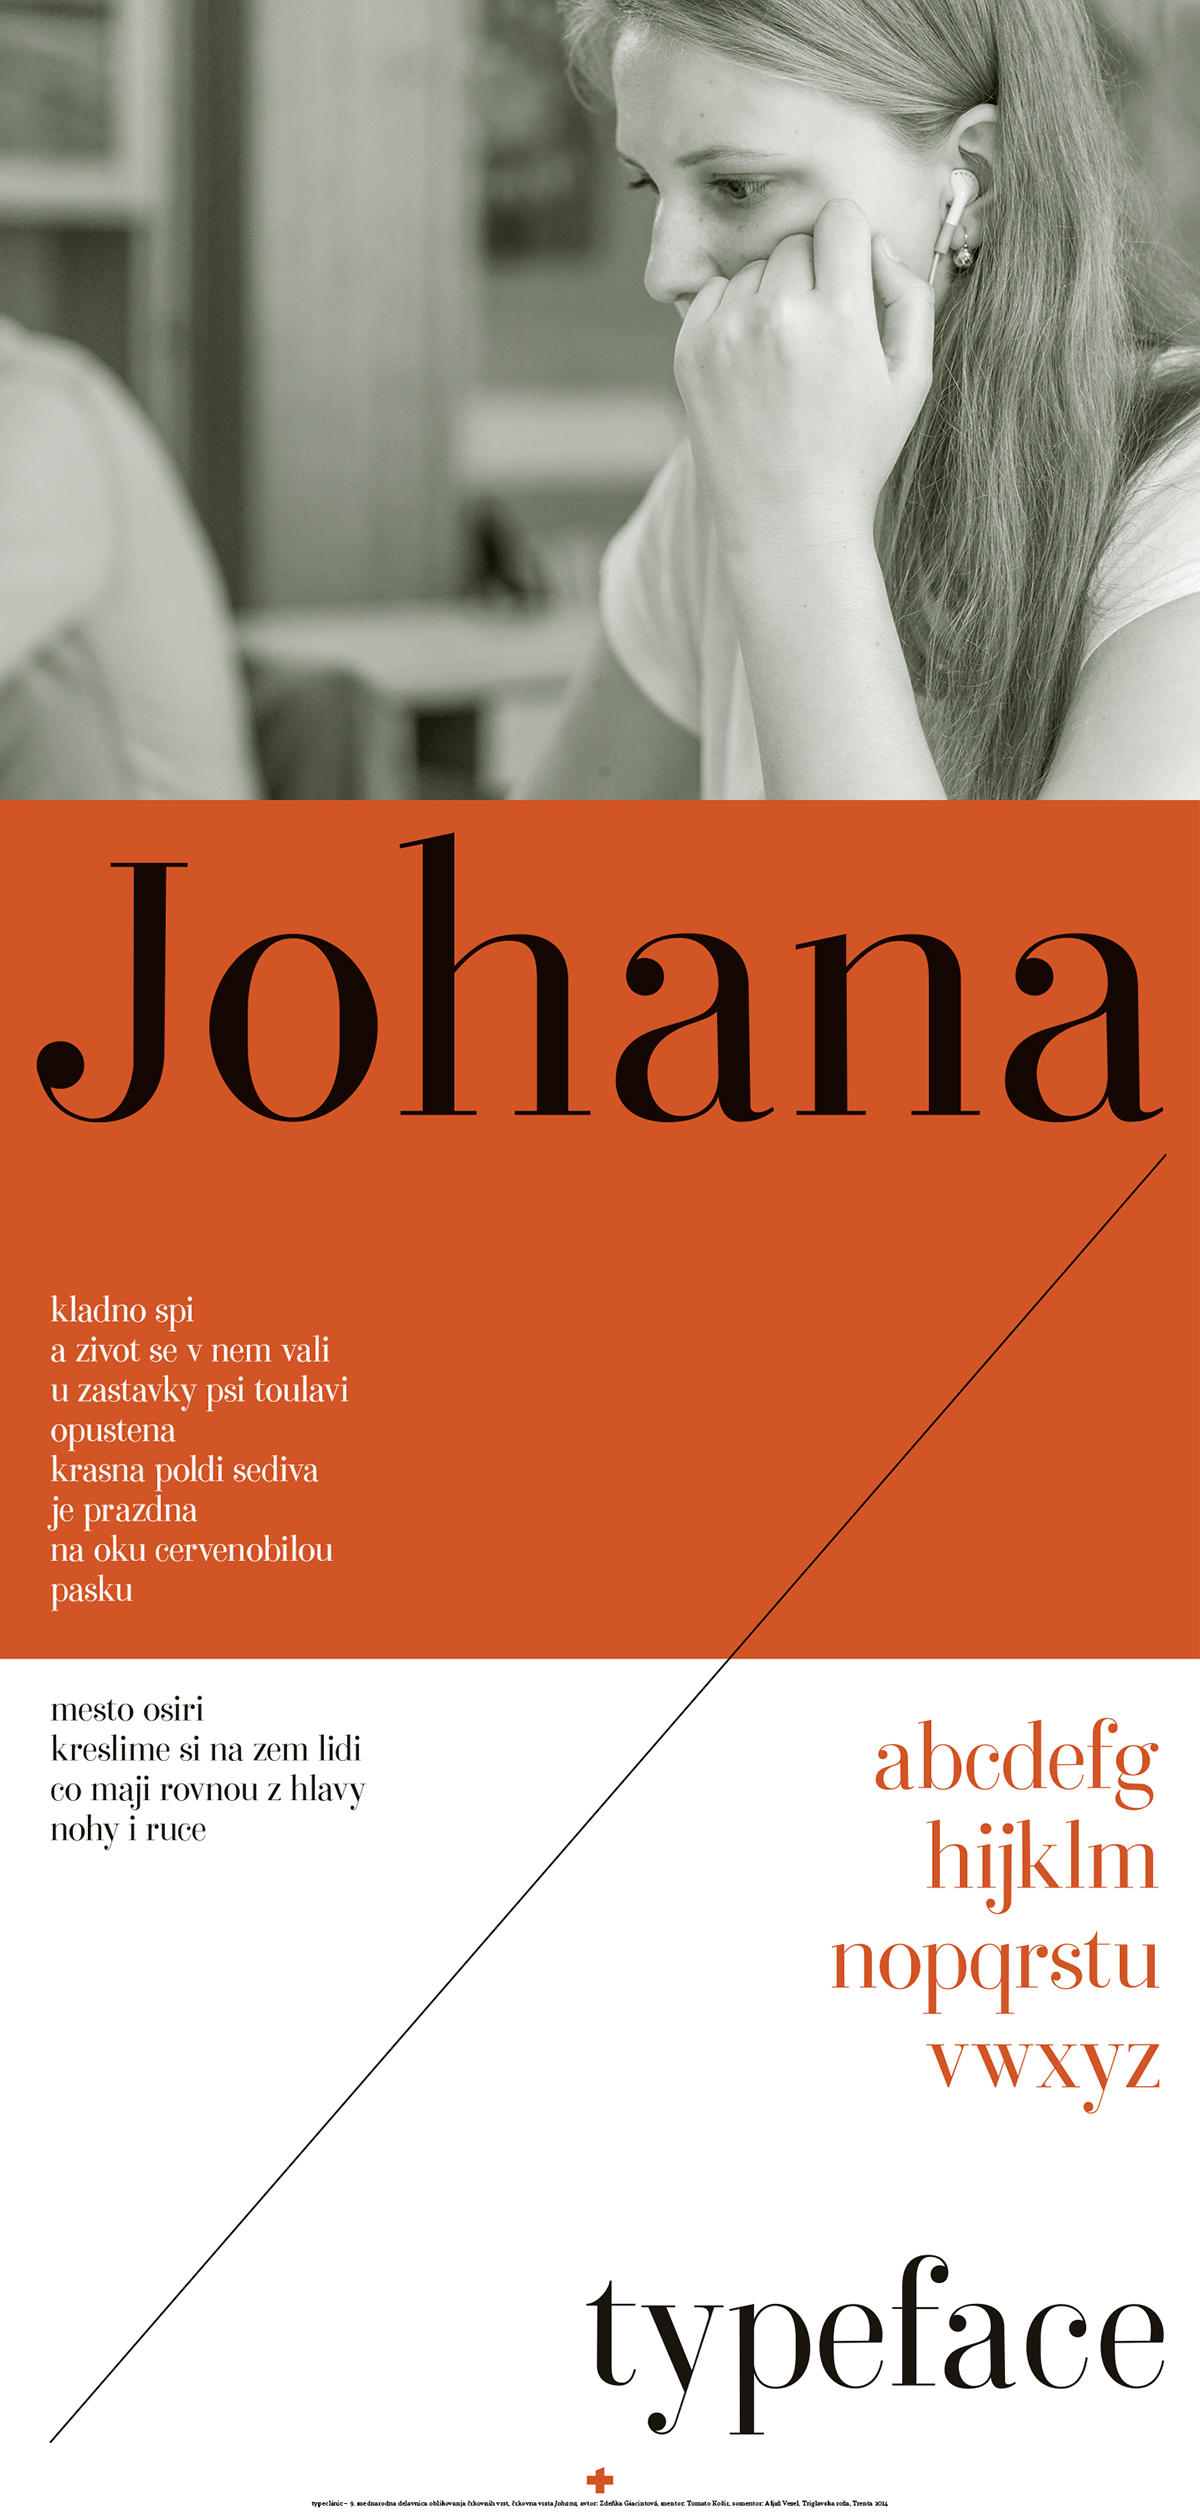 type Typeface coworking font type family Workshop International Event type design slovenia poster letter letters trenta school